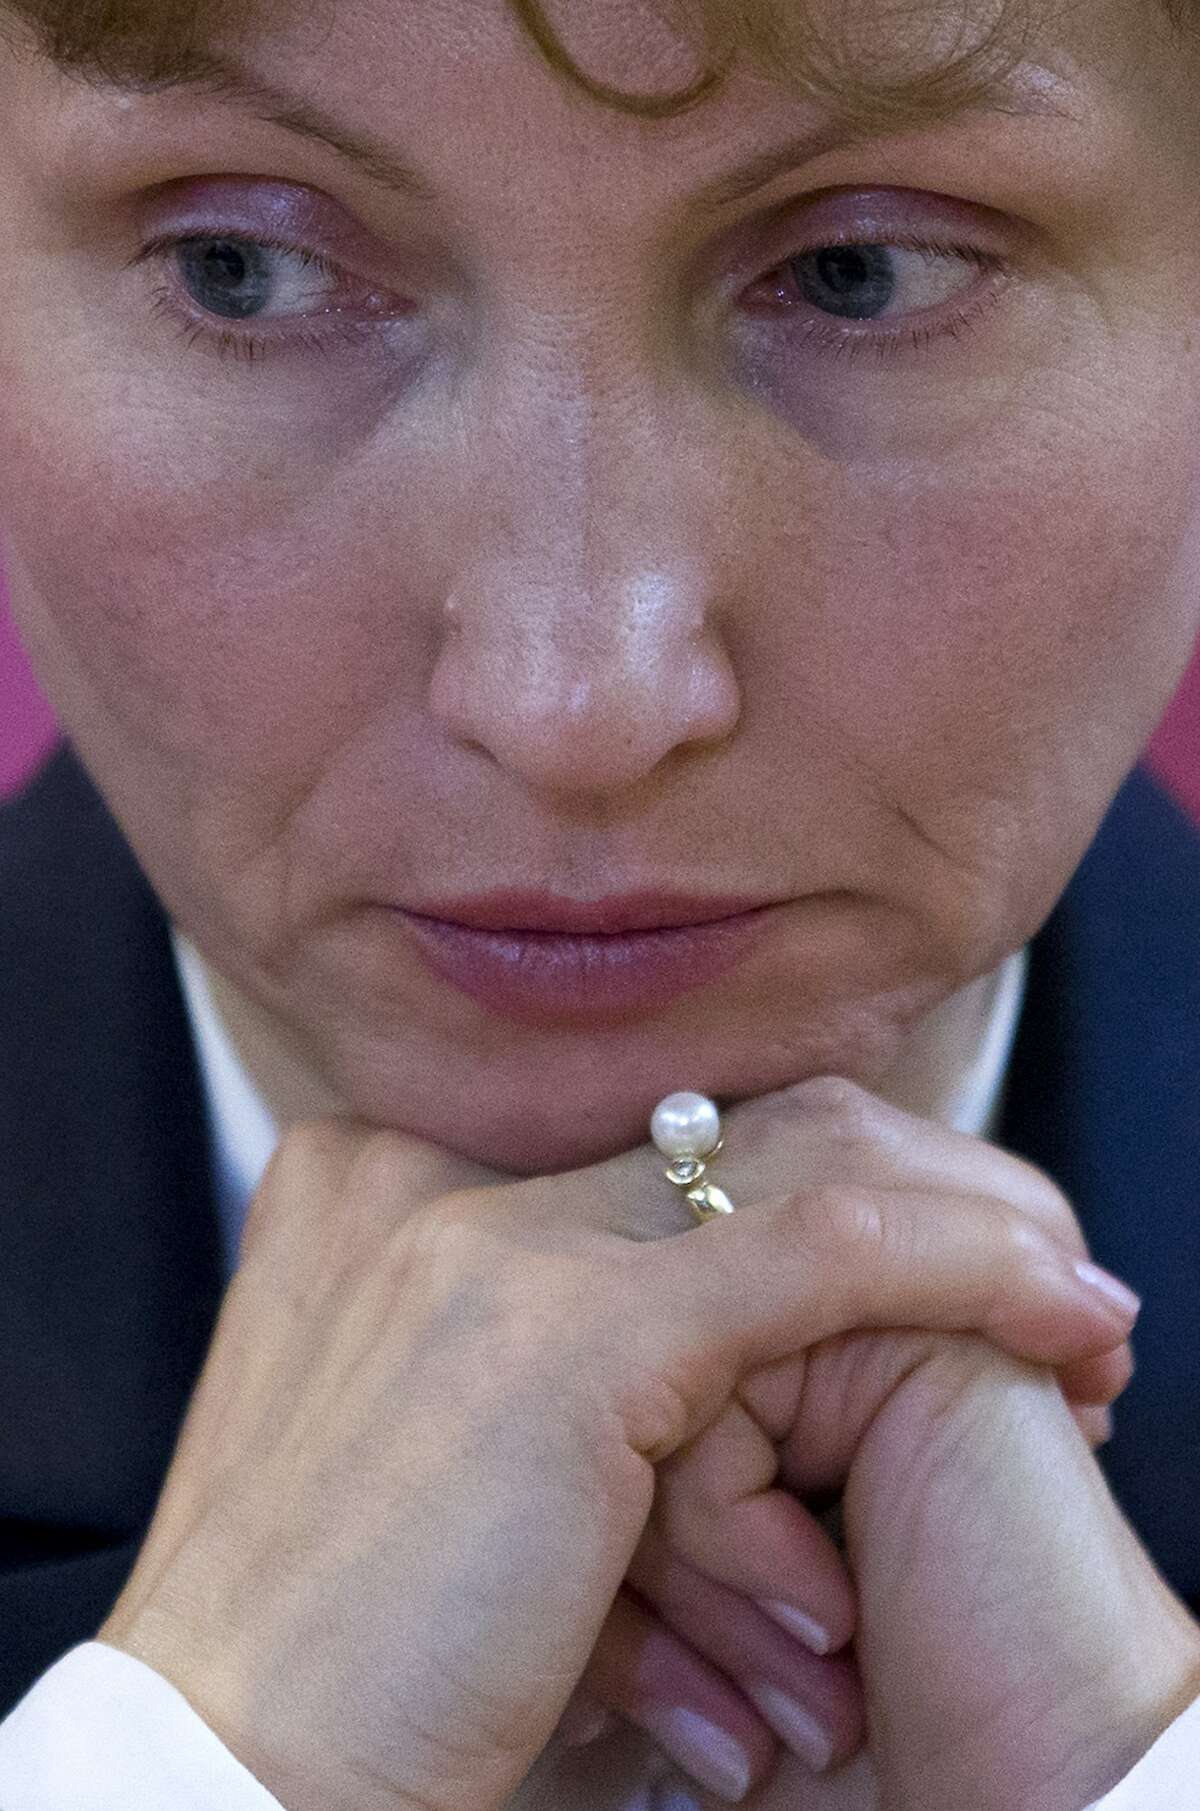 Marina Litvinenko, widow of ex-Russian spy Alexander Litvinenko takes part in a press conference in London on Janurary 21, 2016 following the publication of the public inquiry into the death of her husband. Russian President Vladimir Putin "probably approved" the radiation poisoning of former KGB agent Alexander Litvinenko in London, a British judge said at the conclusion of a public inquiry into his agonising death. Litvinenko was allegedly poisoned at a hotel by a cup of tea laced with polonium-210 -- an extremely expensive radioactive isotope only available in closed nuclear facilities -- in a sequence of events which could have come from a Cold War thriller. AFP PHOTO / JUSTIN TALLISJUSTIN TALLIS/AFP/Getty Images